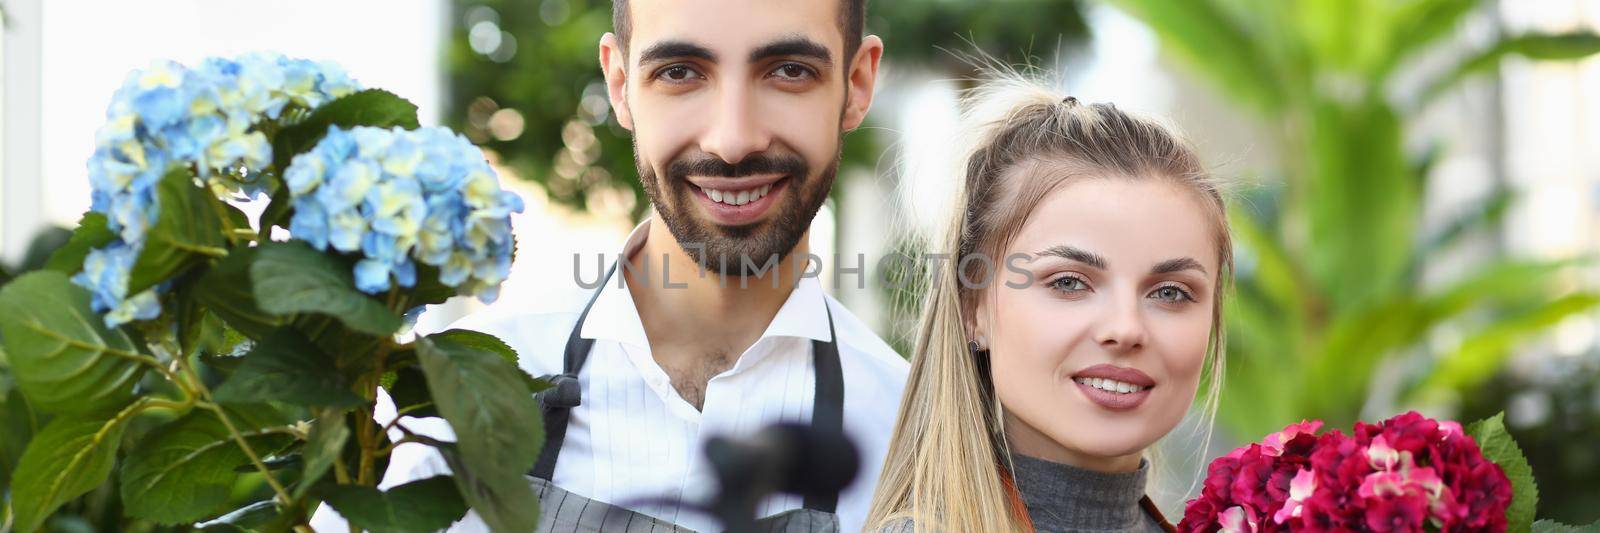 Portrait of young woman and man posing for picture with luxury bouquets of flowers. Smiling workers present their product from shop. Ad, business concept